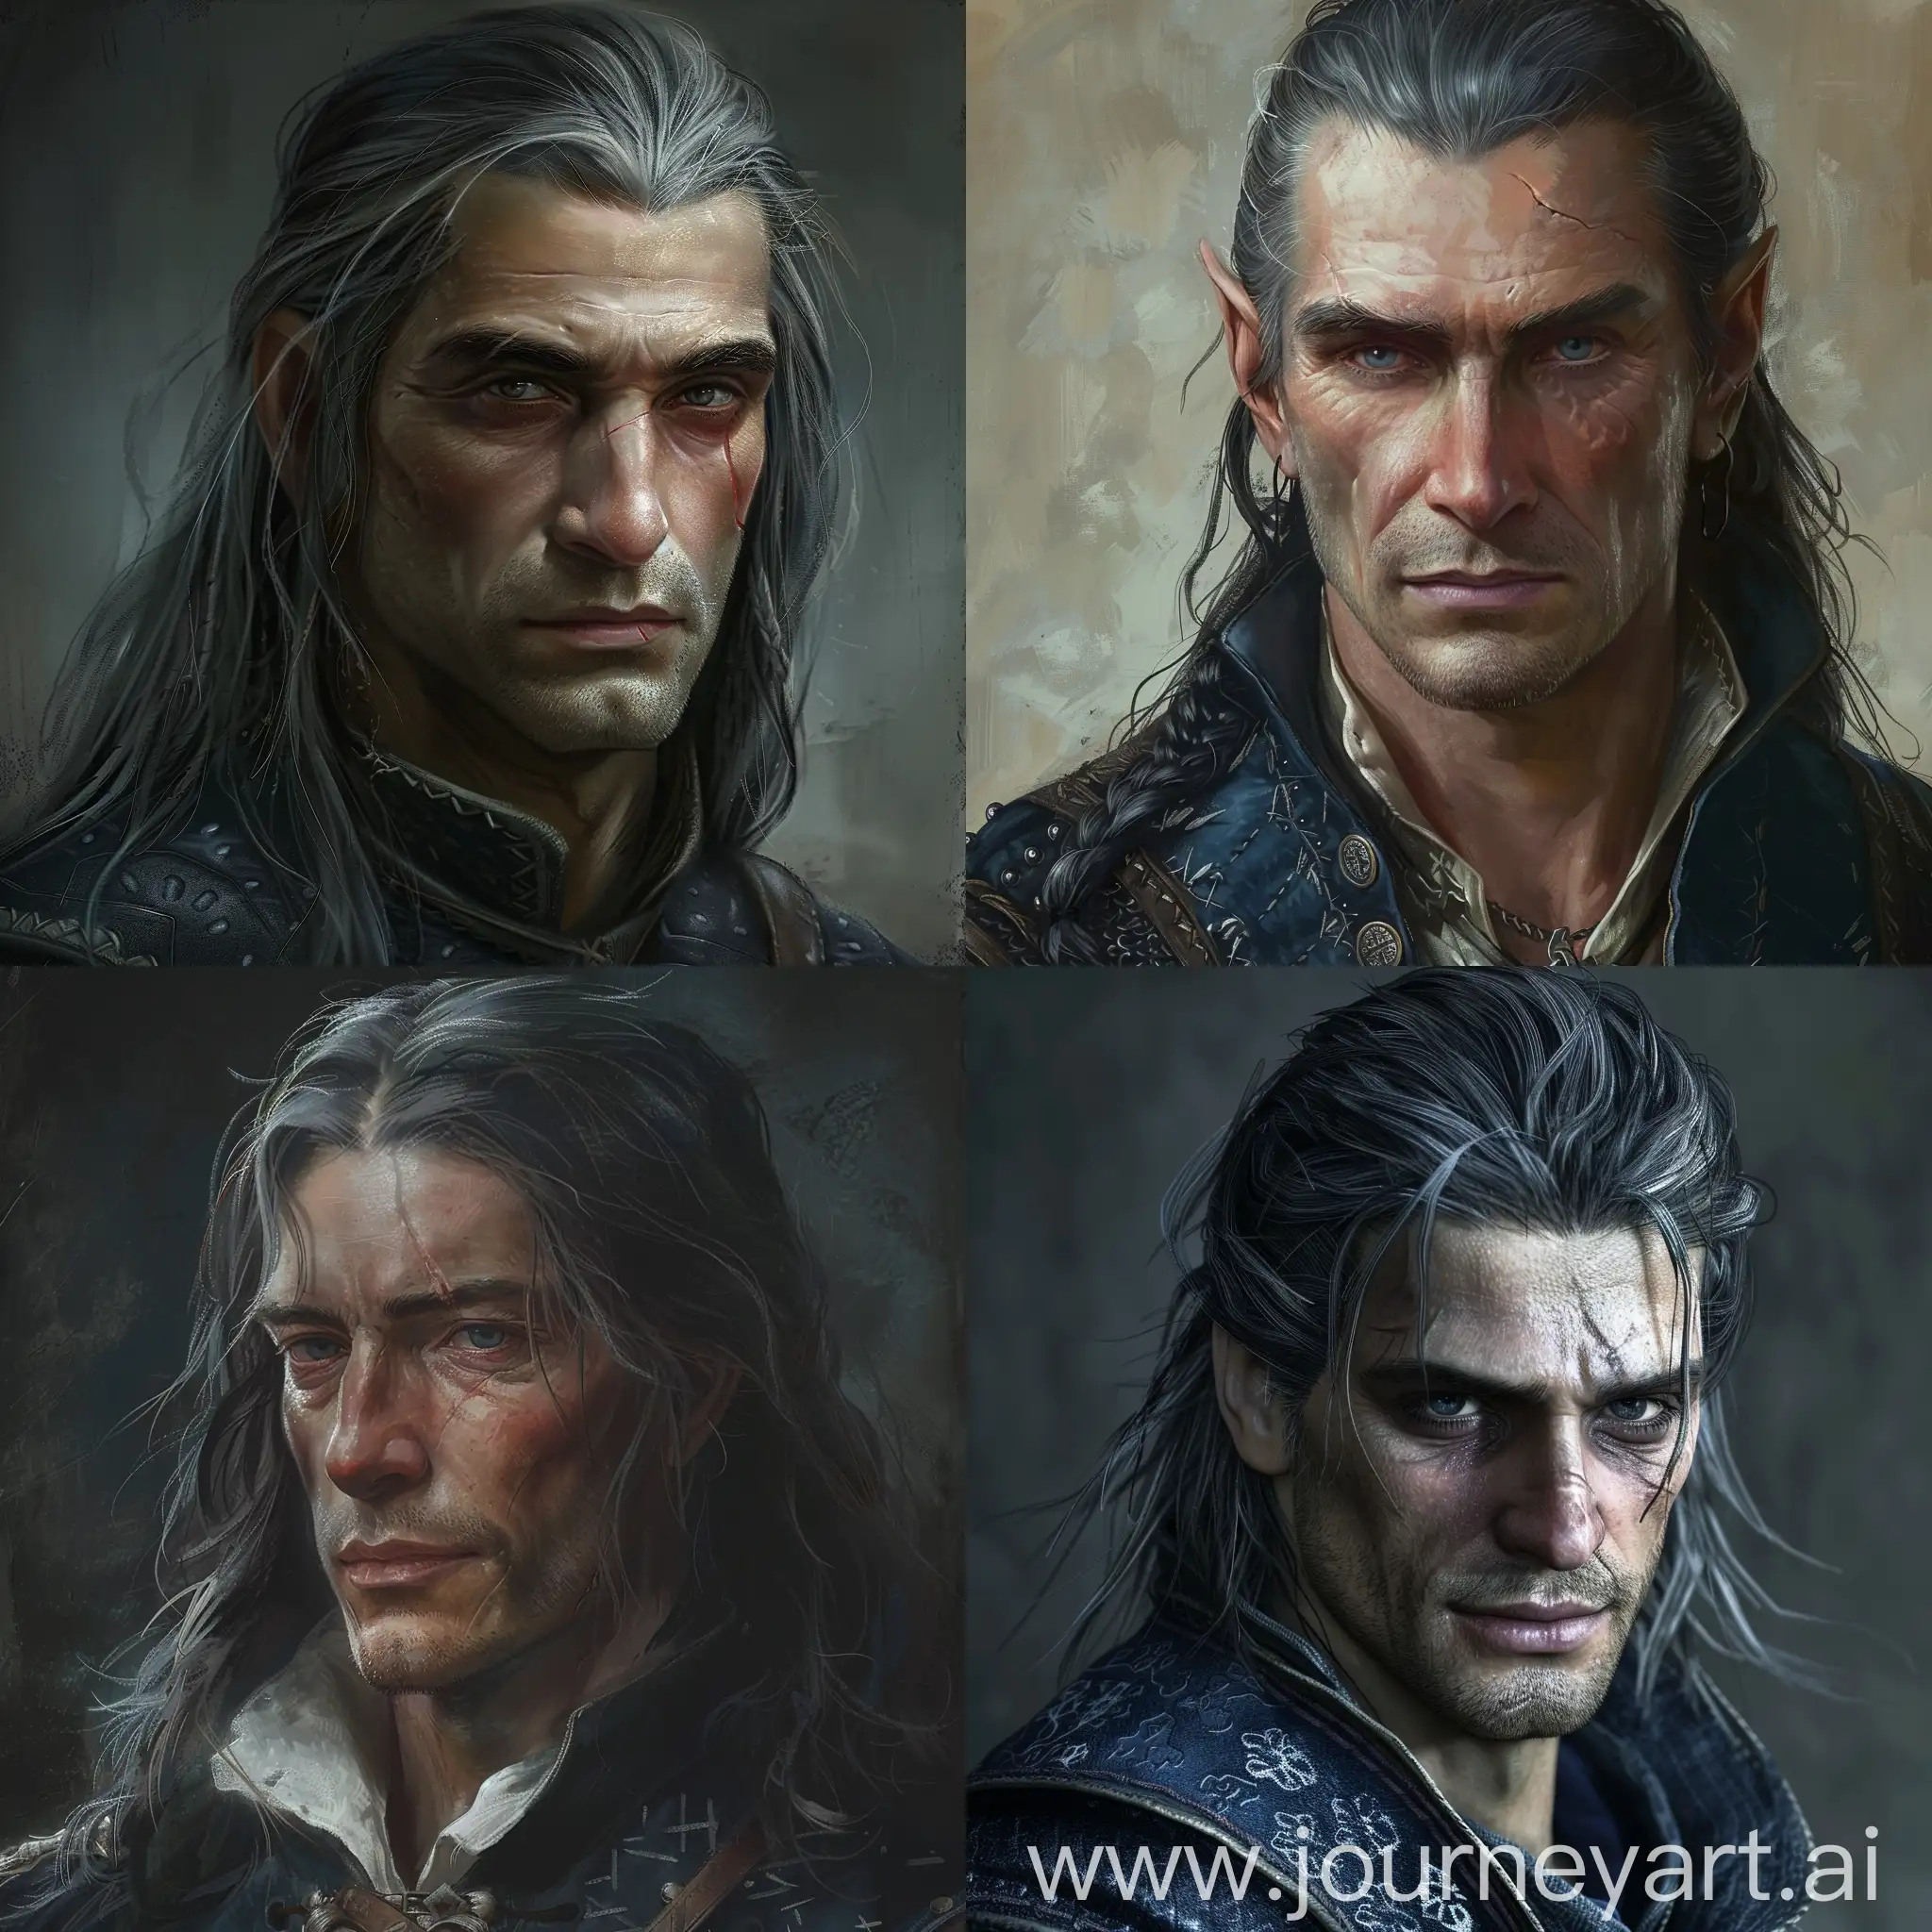 A 35-year-old man with small wrinkles and dark circles under his eyes. He has a thin, elegant face, pale skin and an aquiline nose with a hook. He has long dark gray hair. The lips are thin and pale. A few strands, along with bangs, are gathered in a ponytail, the rest are on his shoulders. He has a gray streak on his left side. The right eye is dark blue, almost black, the left eye is pale blue, almost blind. A shallow scar crosses the left eye through the eyebrow and cheek. He is dressed in a medieval dark blue outfit trimmed with silver. He wears white gloves on his hands.